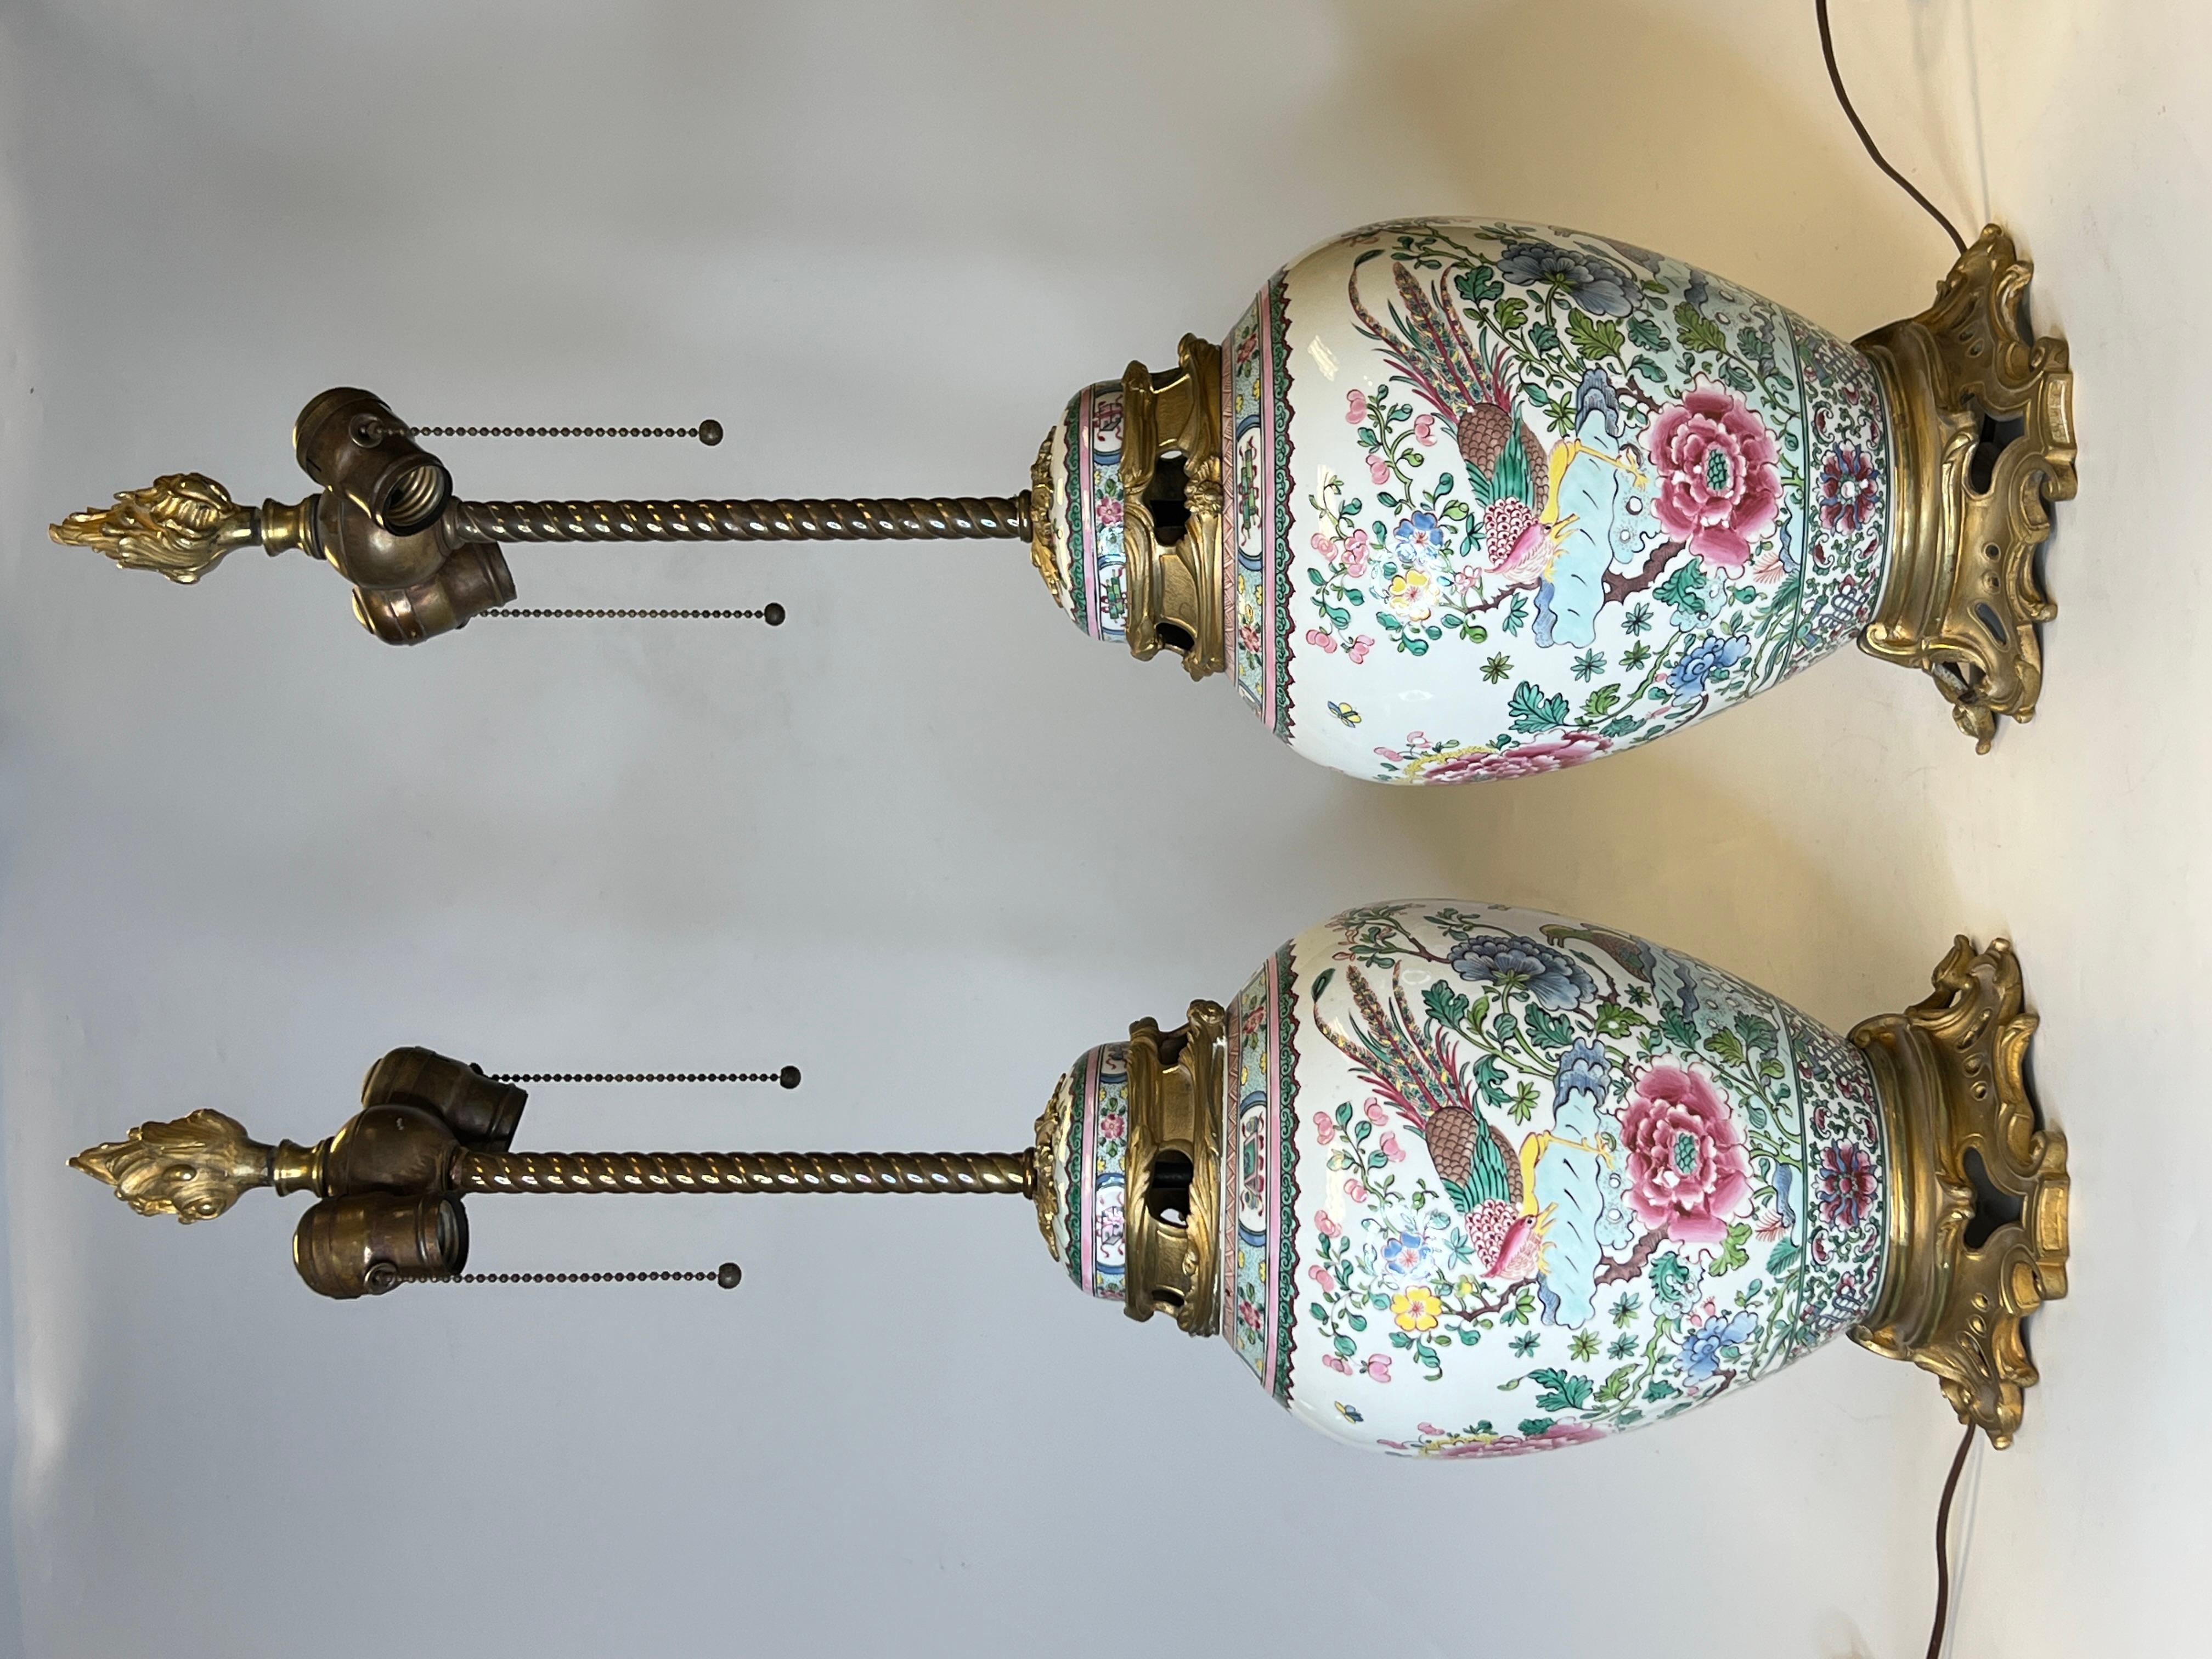 Pair of 19th century French Chinese export style porcelain and gilt bronze table lamps with Phoenix bird and flower motifs.